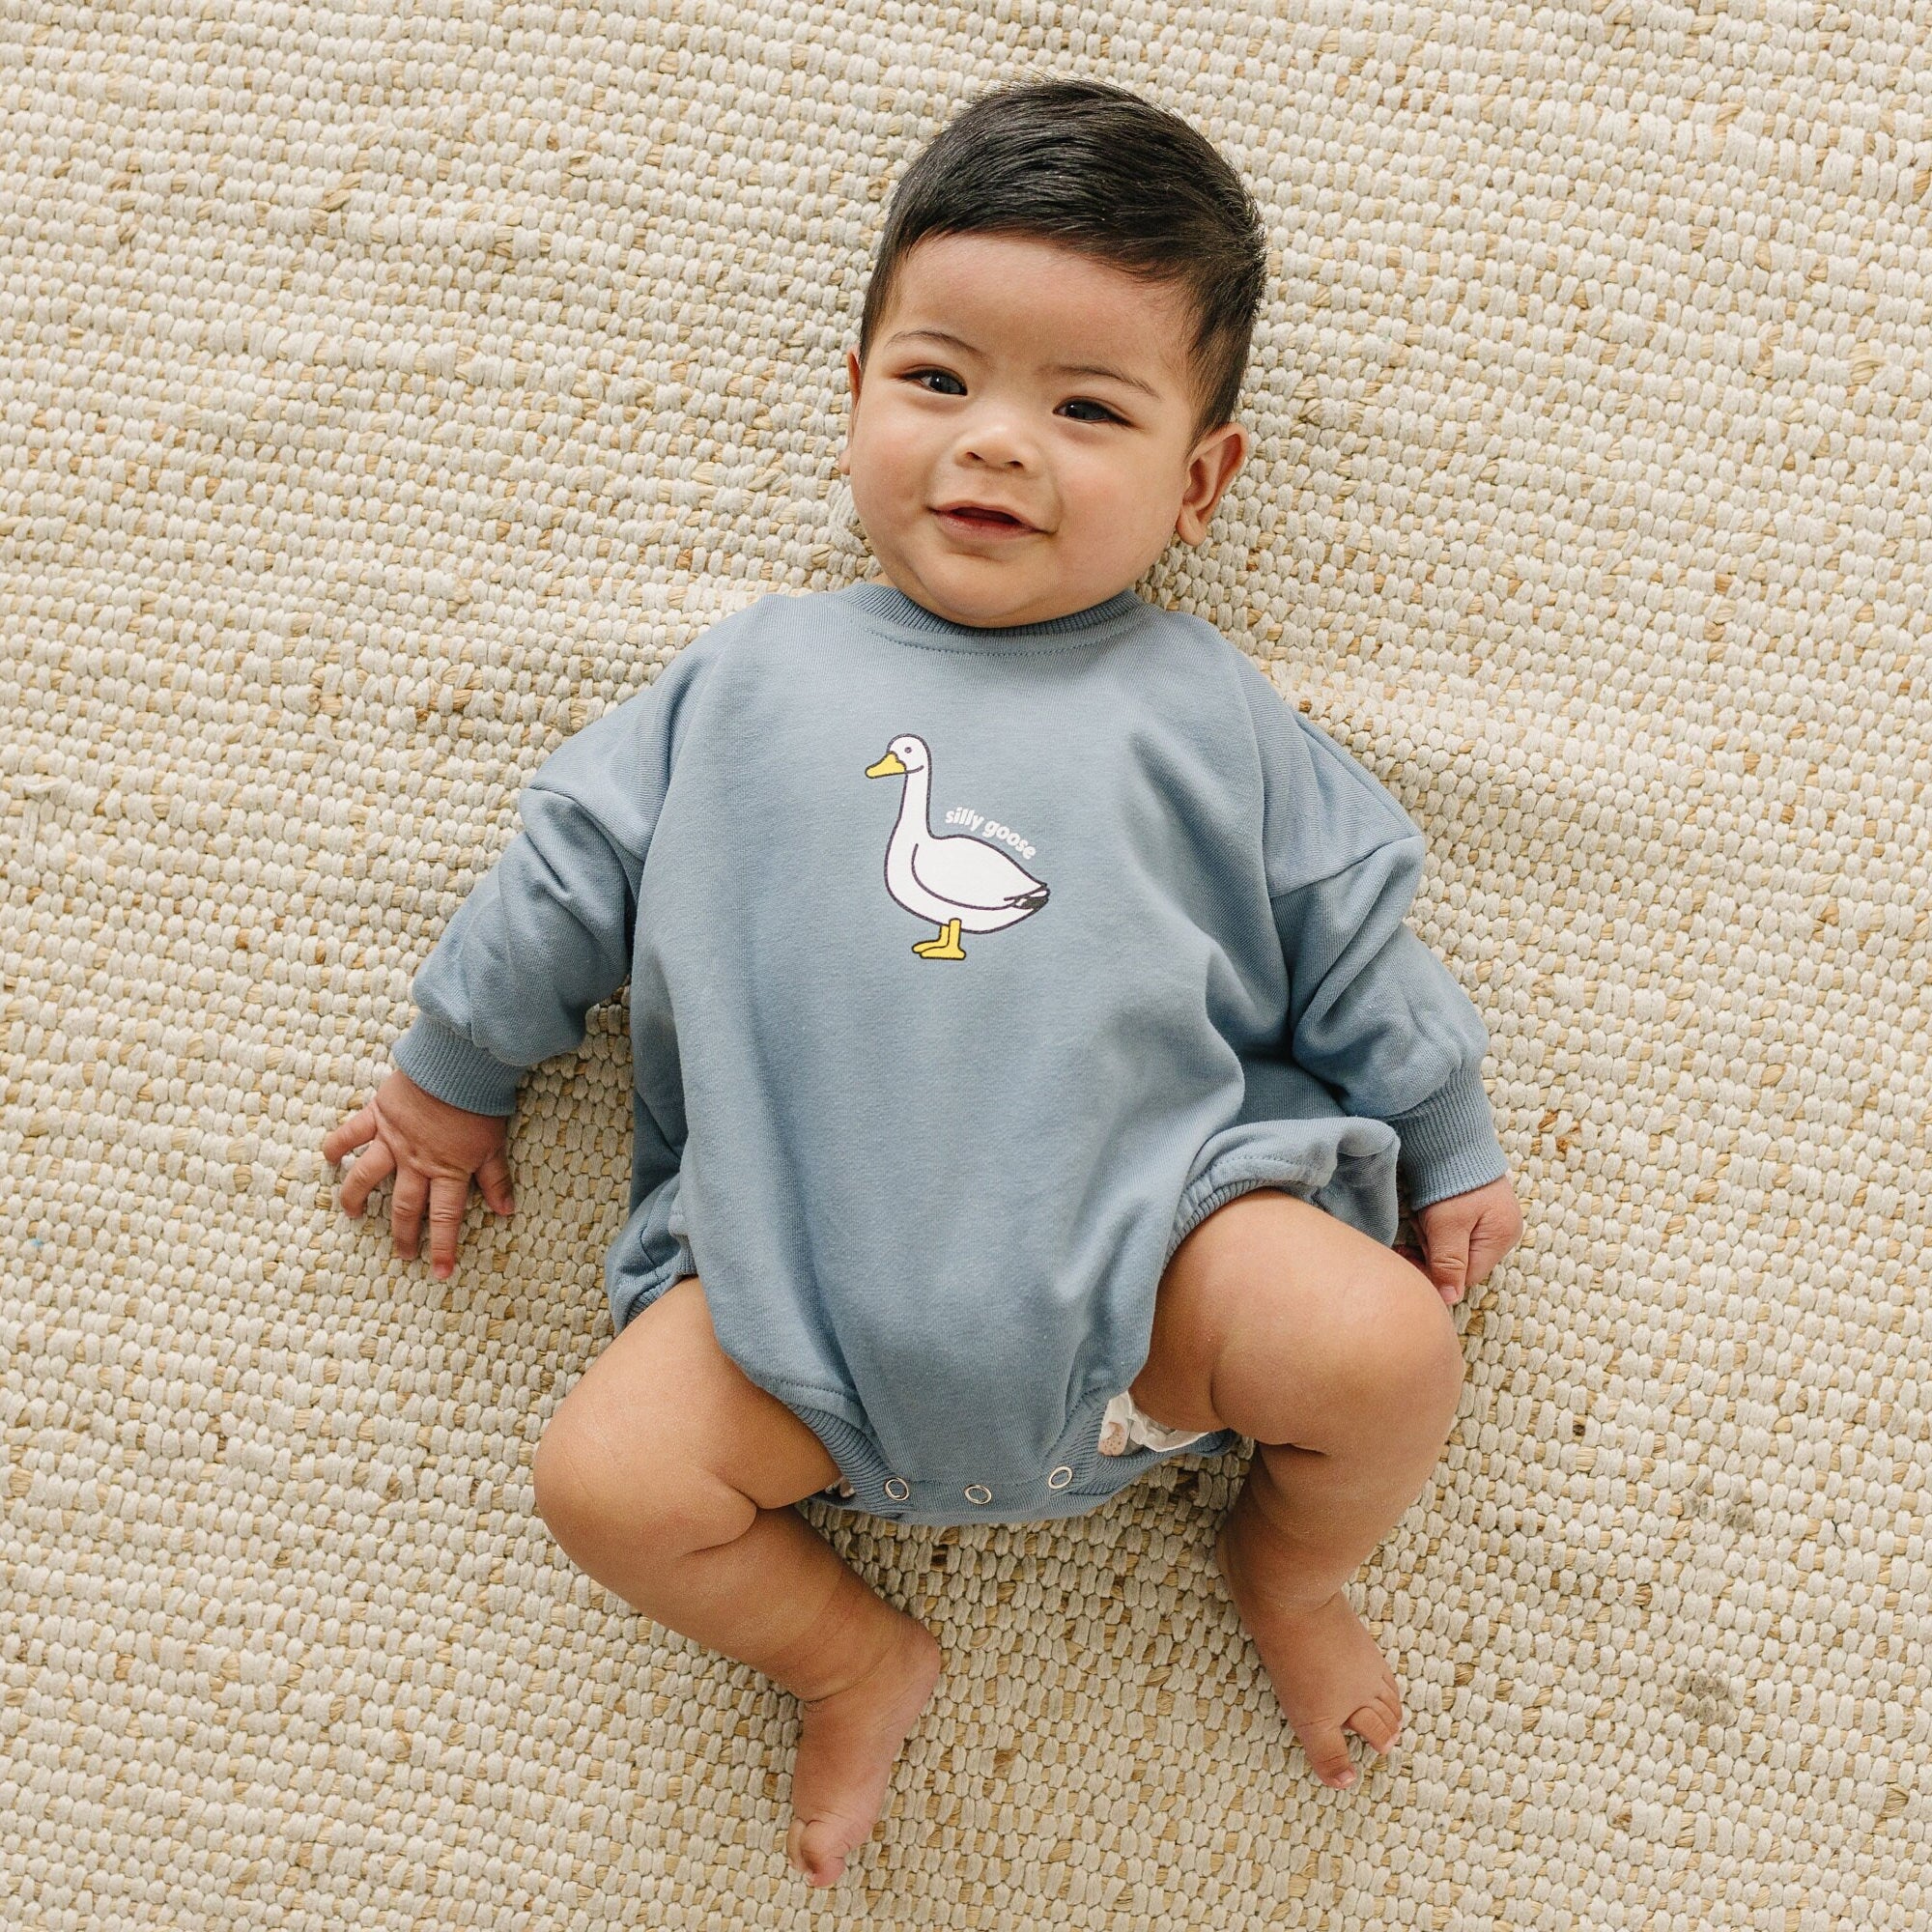 Silly Goose Sweatshirt Romper - more colors